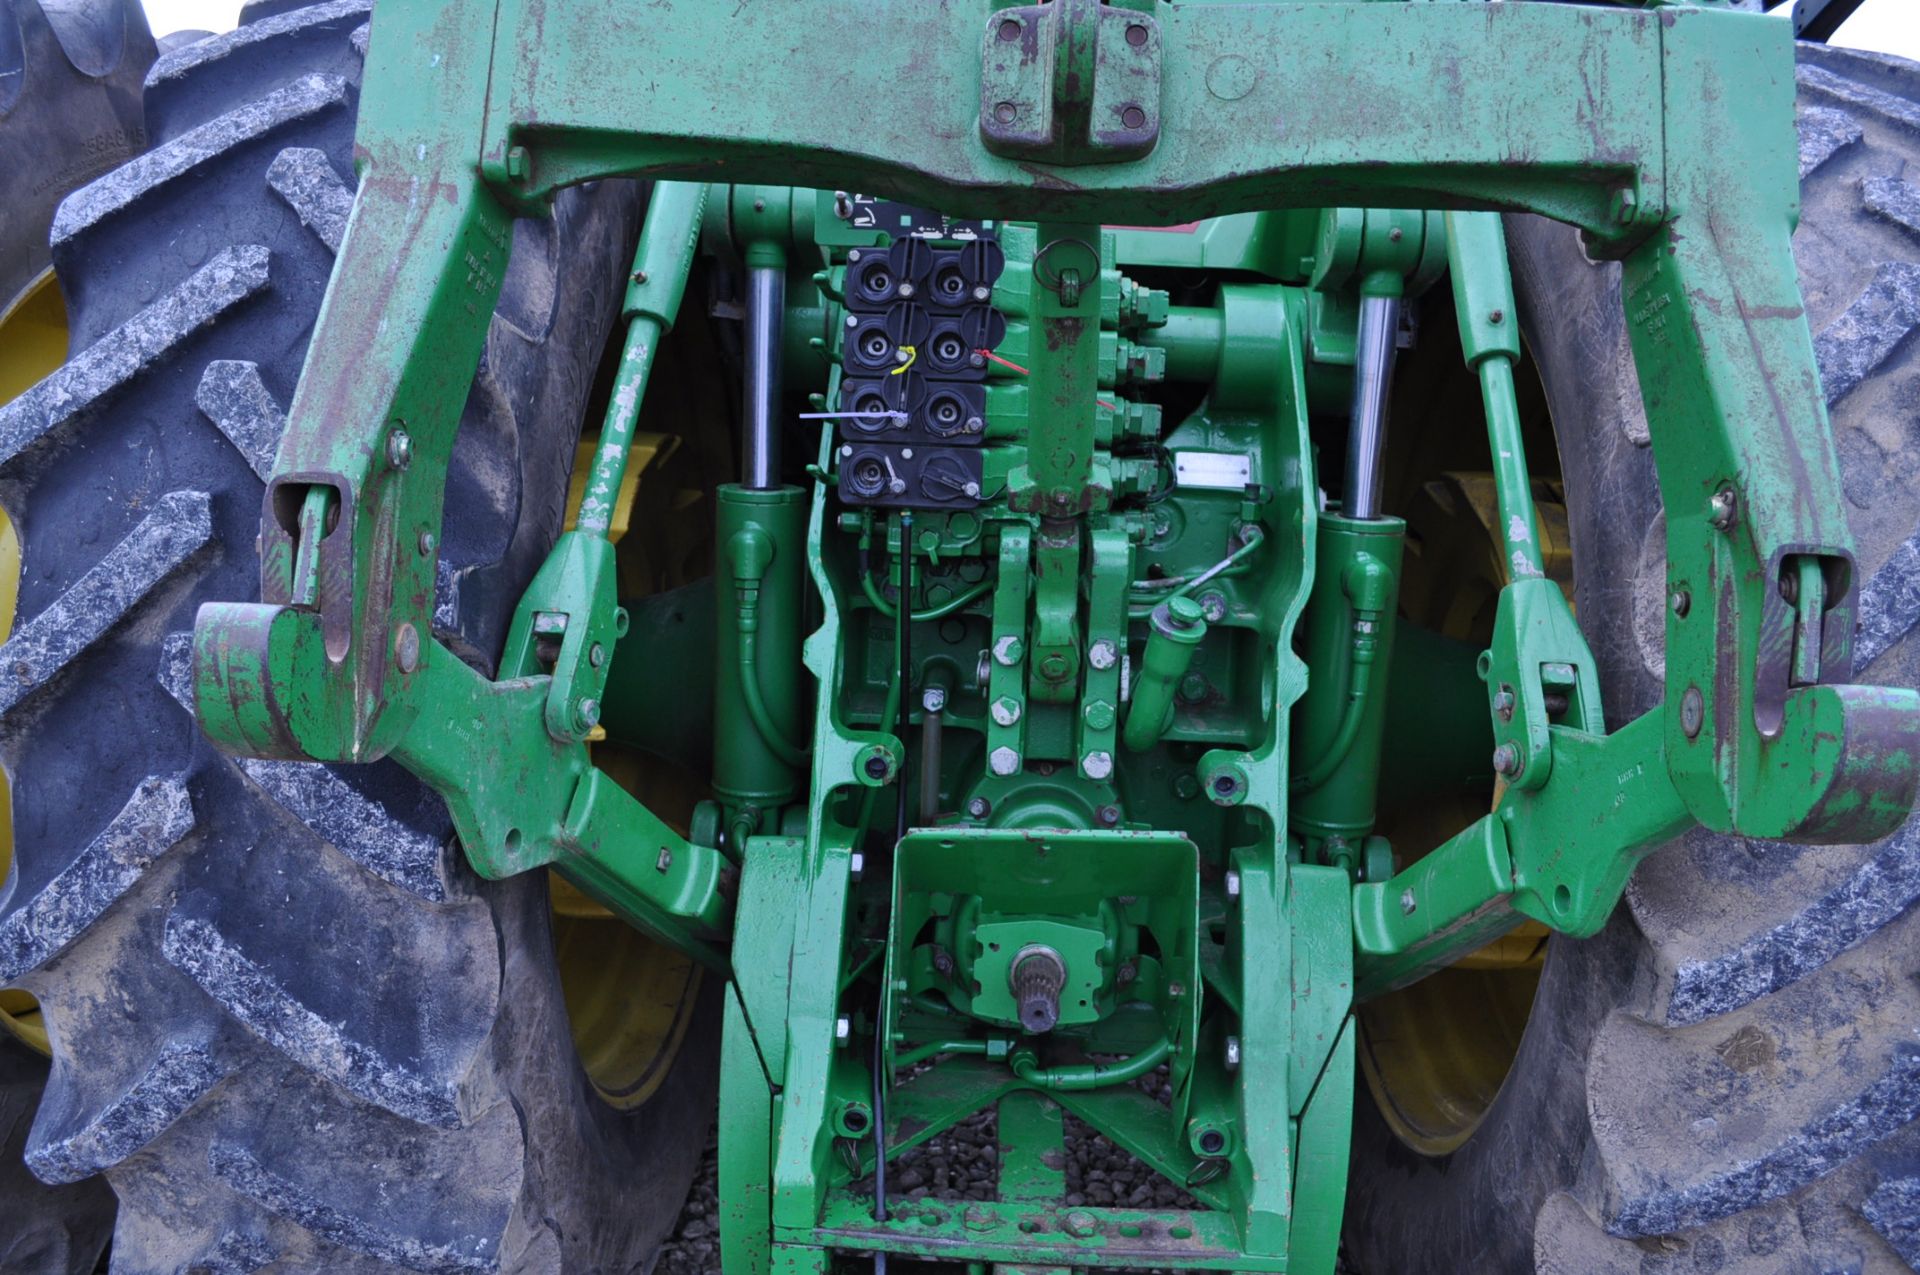 John Deere 8300 tractor, MFWD, 480/80 R 46 duals, 380/85 R 34 front, fenders, front wts, 4 hyd - Image 12 of 21